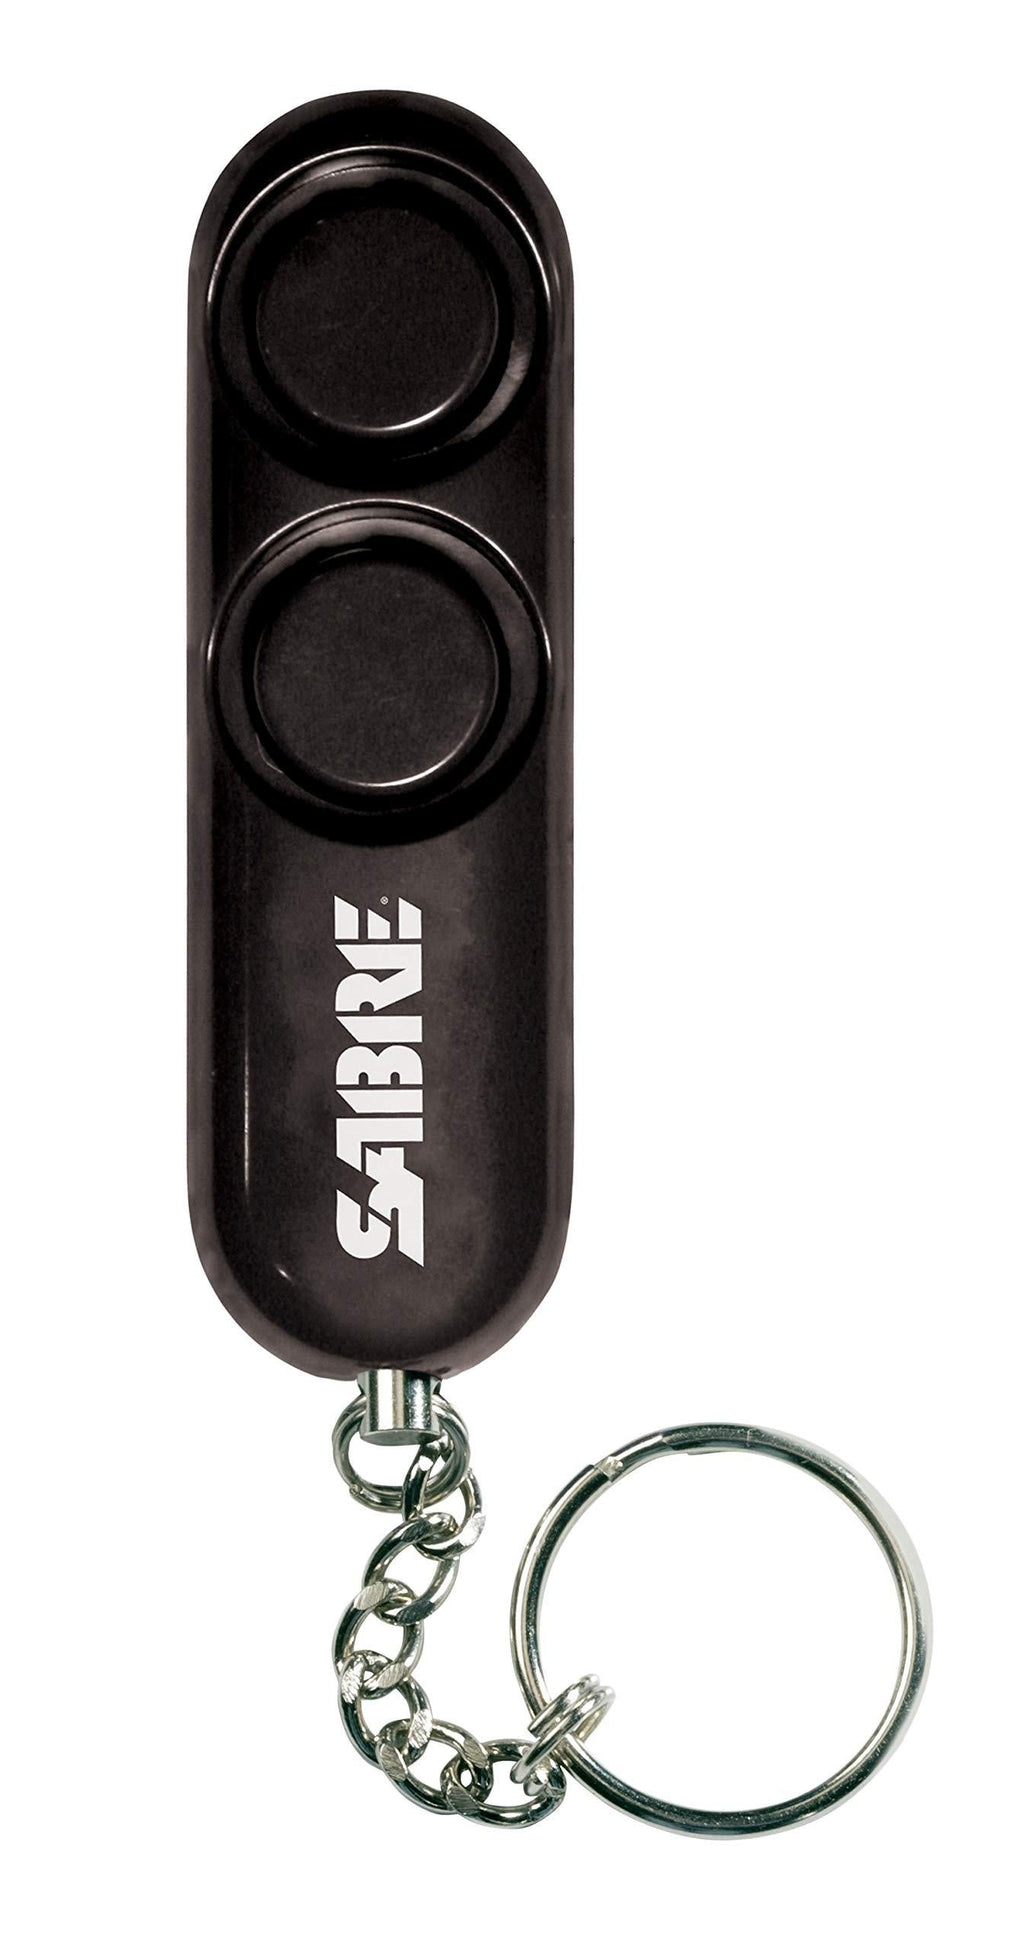 SABRE Self-Defense Safety LOUD Dual Siren PA-01 Key Ring, 120dB, Audible Up To 1,280 Feet (390 Meters), Simple Operation, Reusable, One Size, Black Personal Alarm - LeoForward Australia